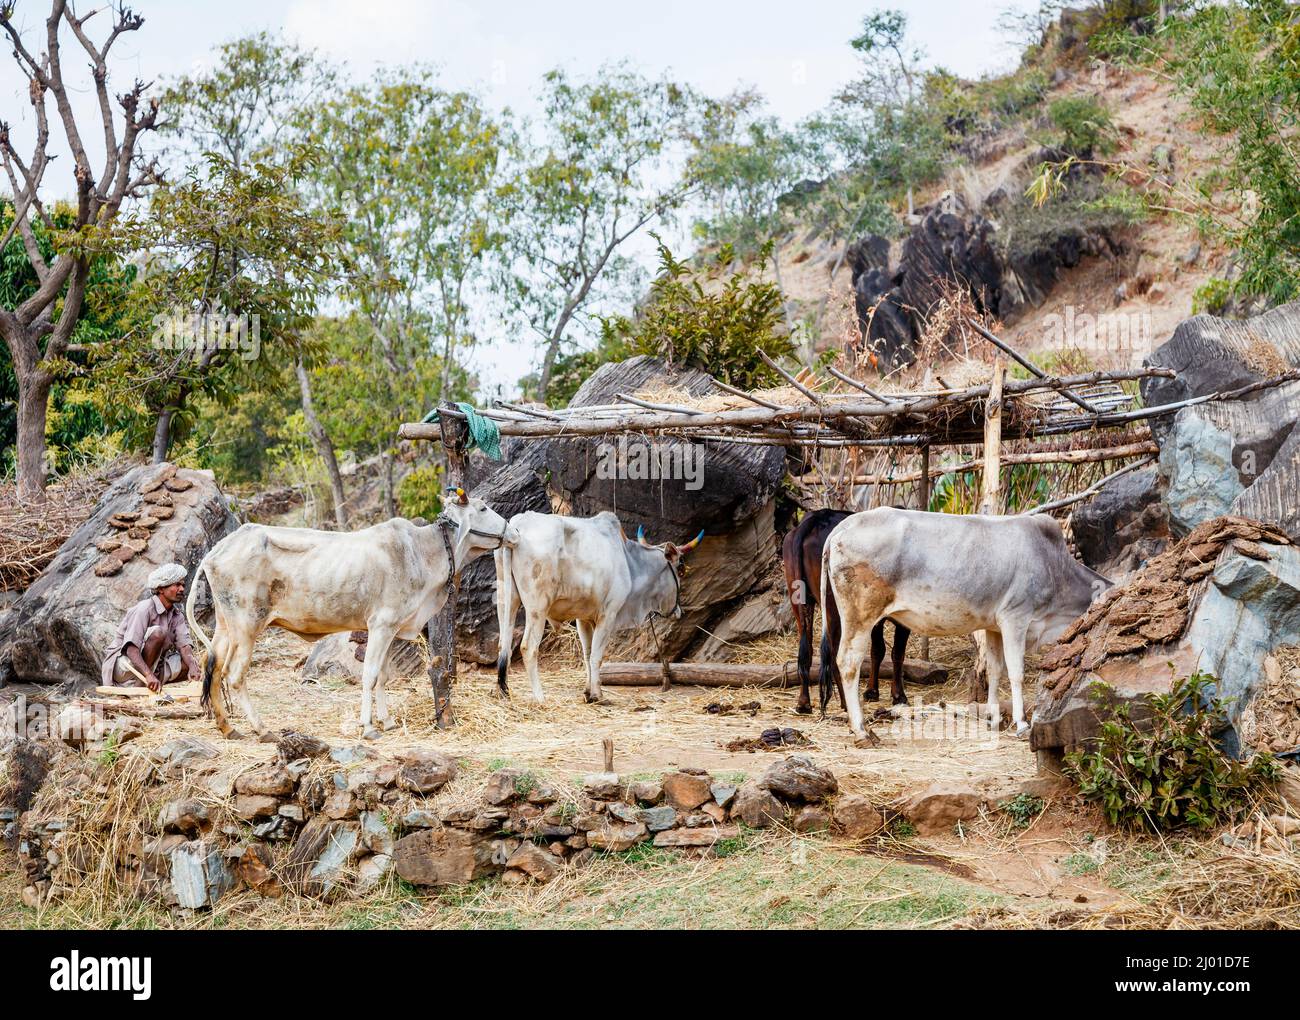 White indian cows in a flimsy stable or shelter near Kumbhalgarh Fort in the Aravalli Hills, Rajsamand district near Udaipur, Rajasthan, western India Stock Photo